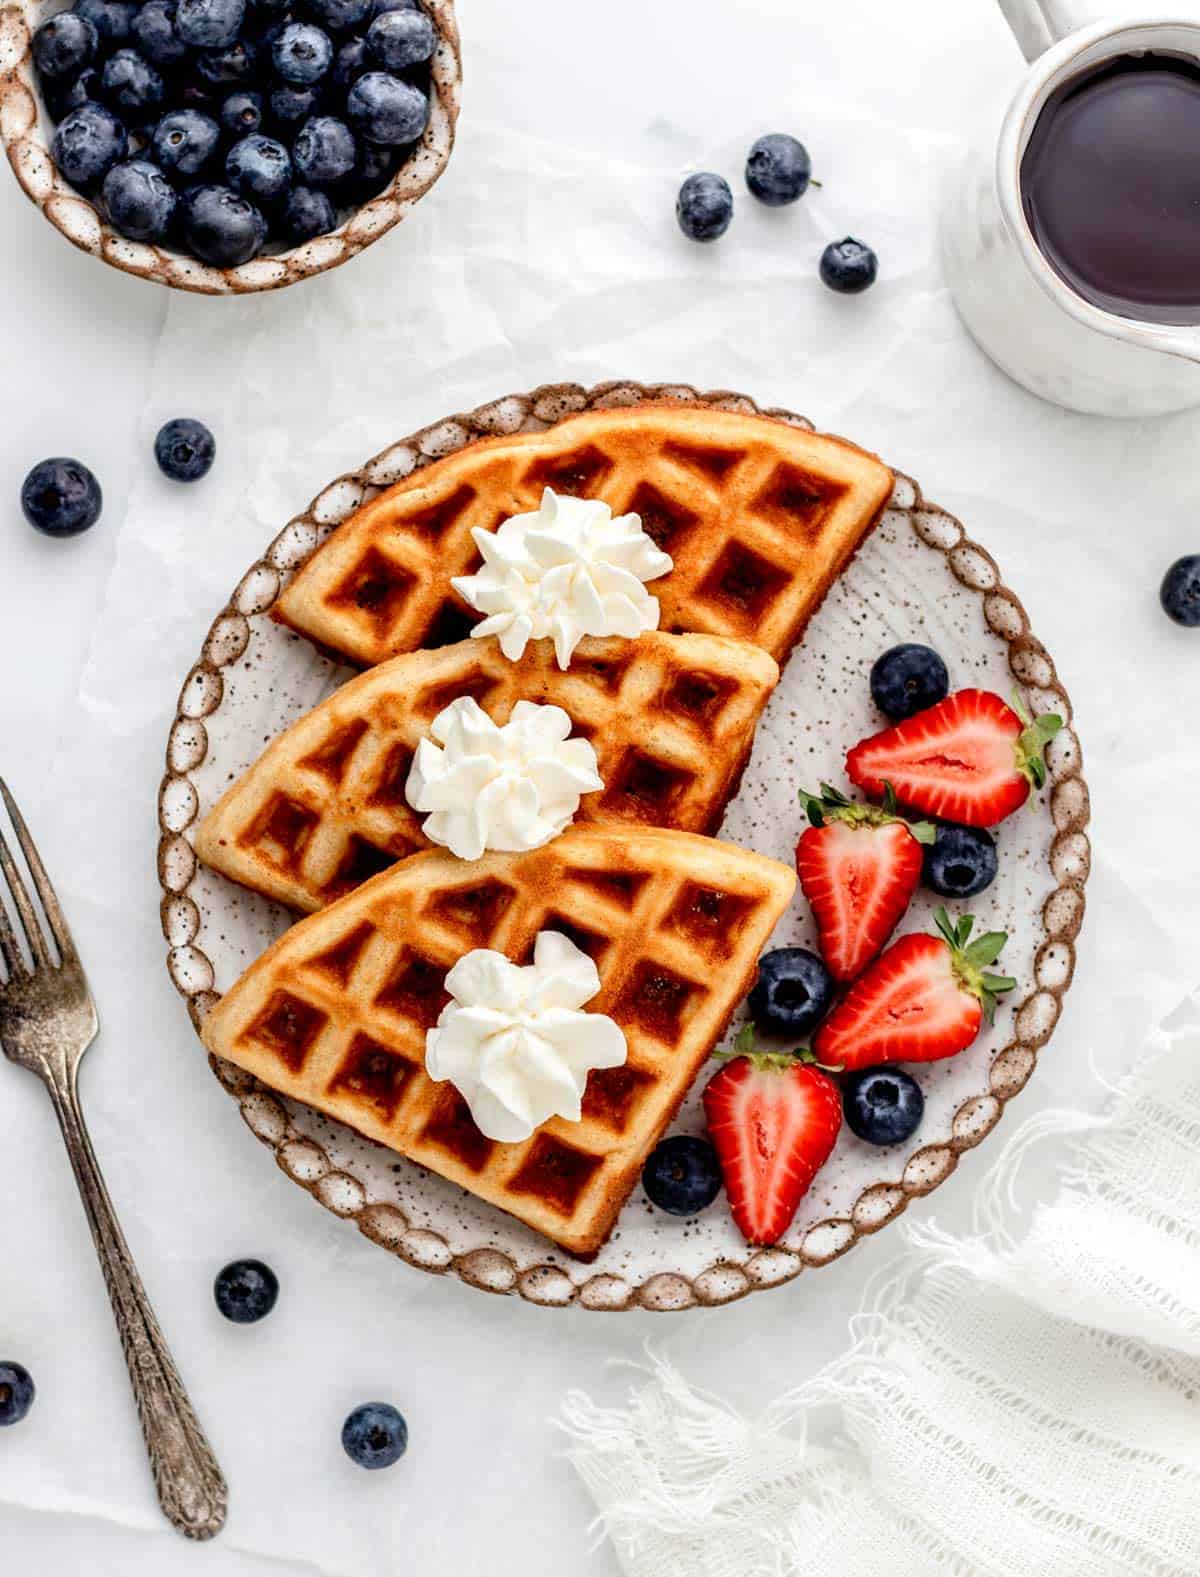 Three almond flour waffles on a plate with berries.